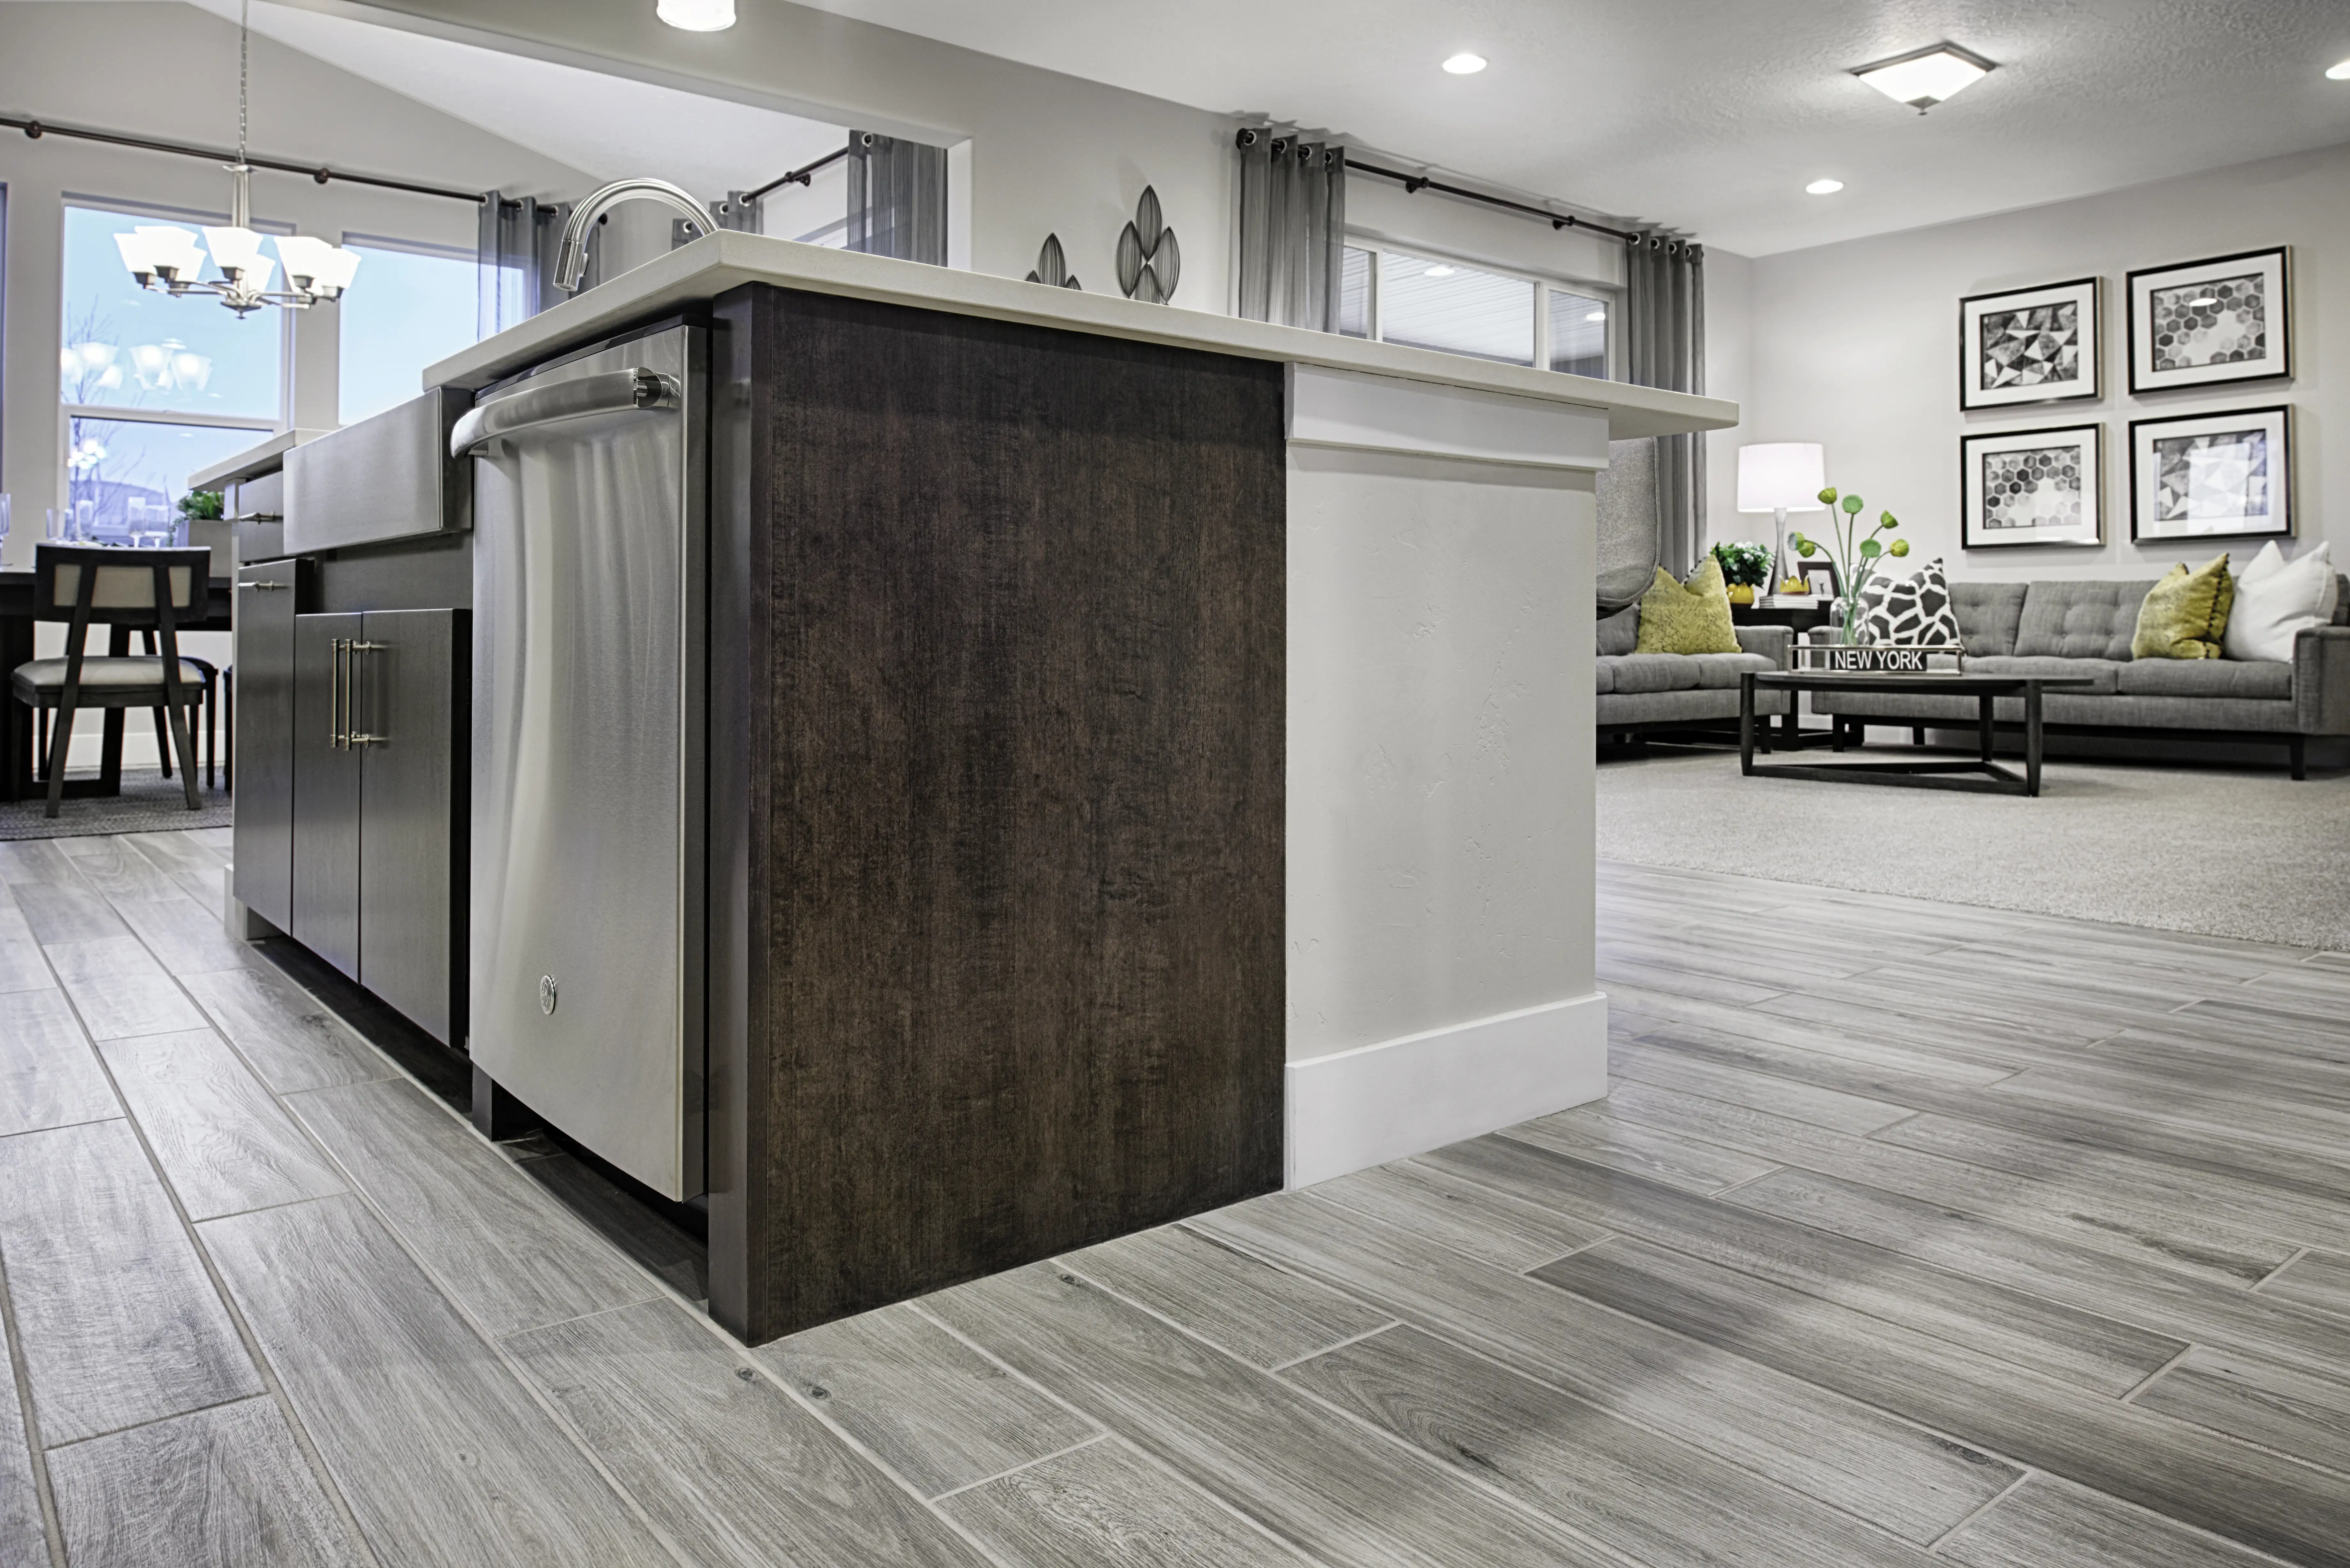 Dark wood kitchen island with dishwasher and living room in the background